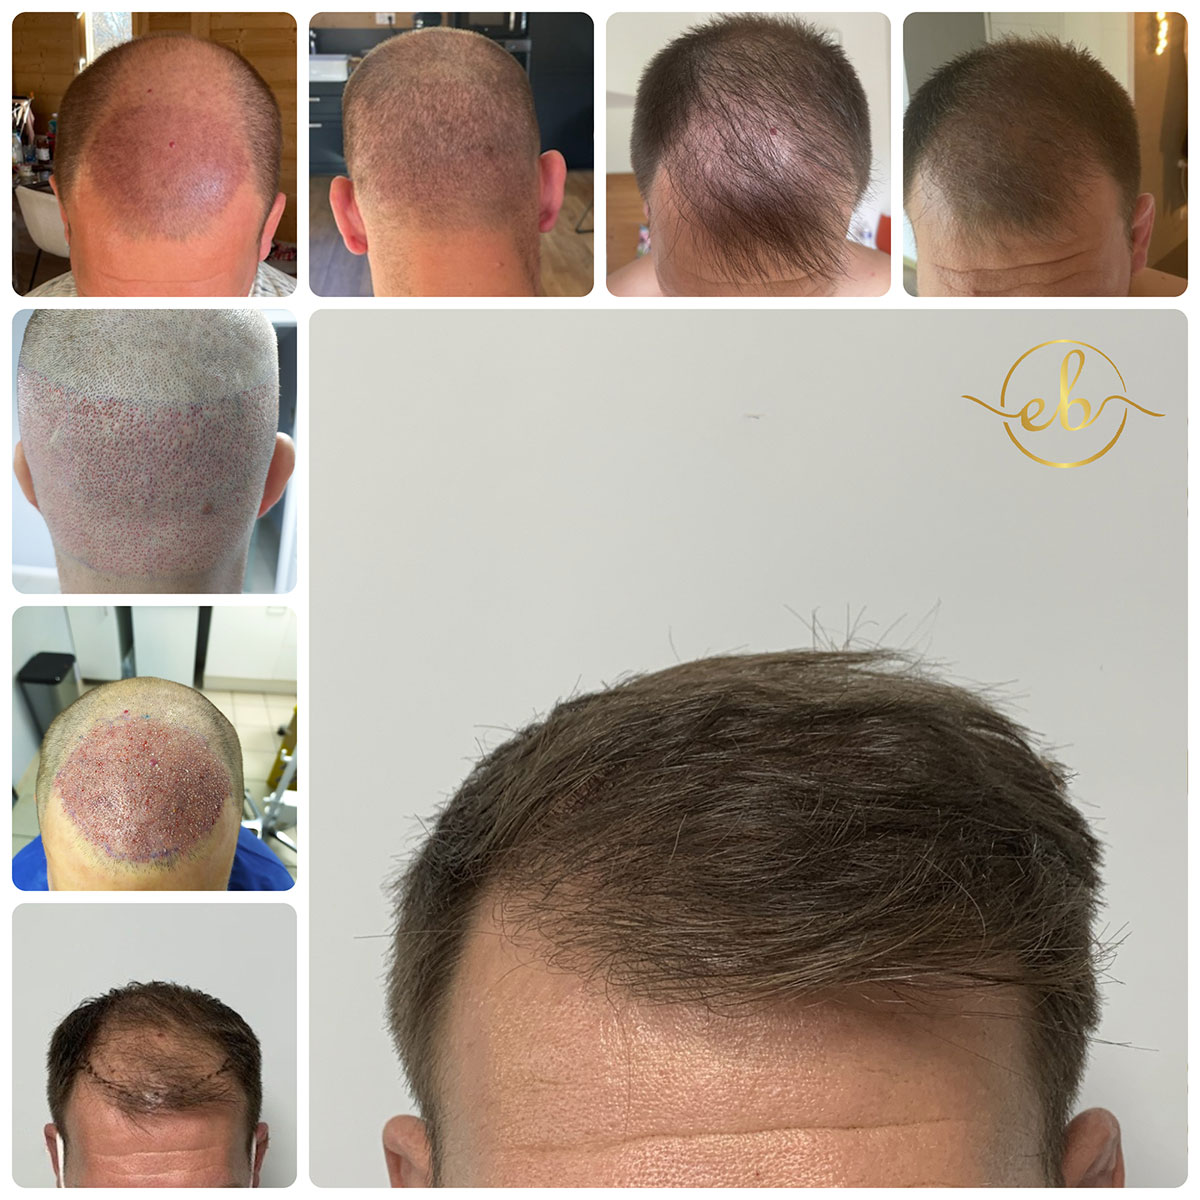 Ziering Medical: The Starting Point for Hair Restoration and Its Affordability